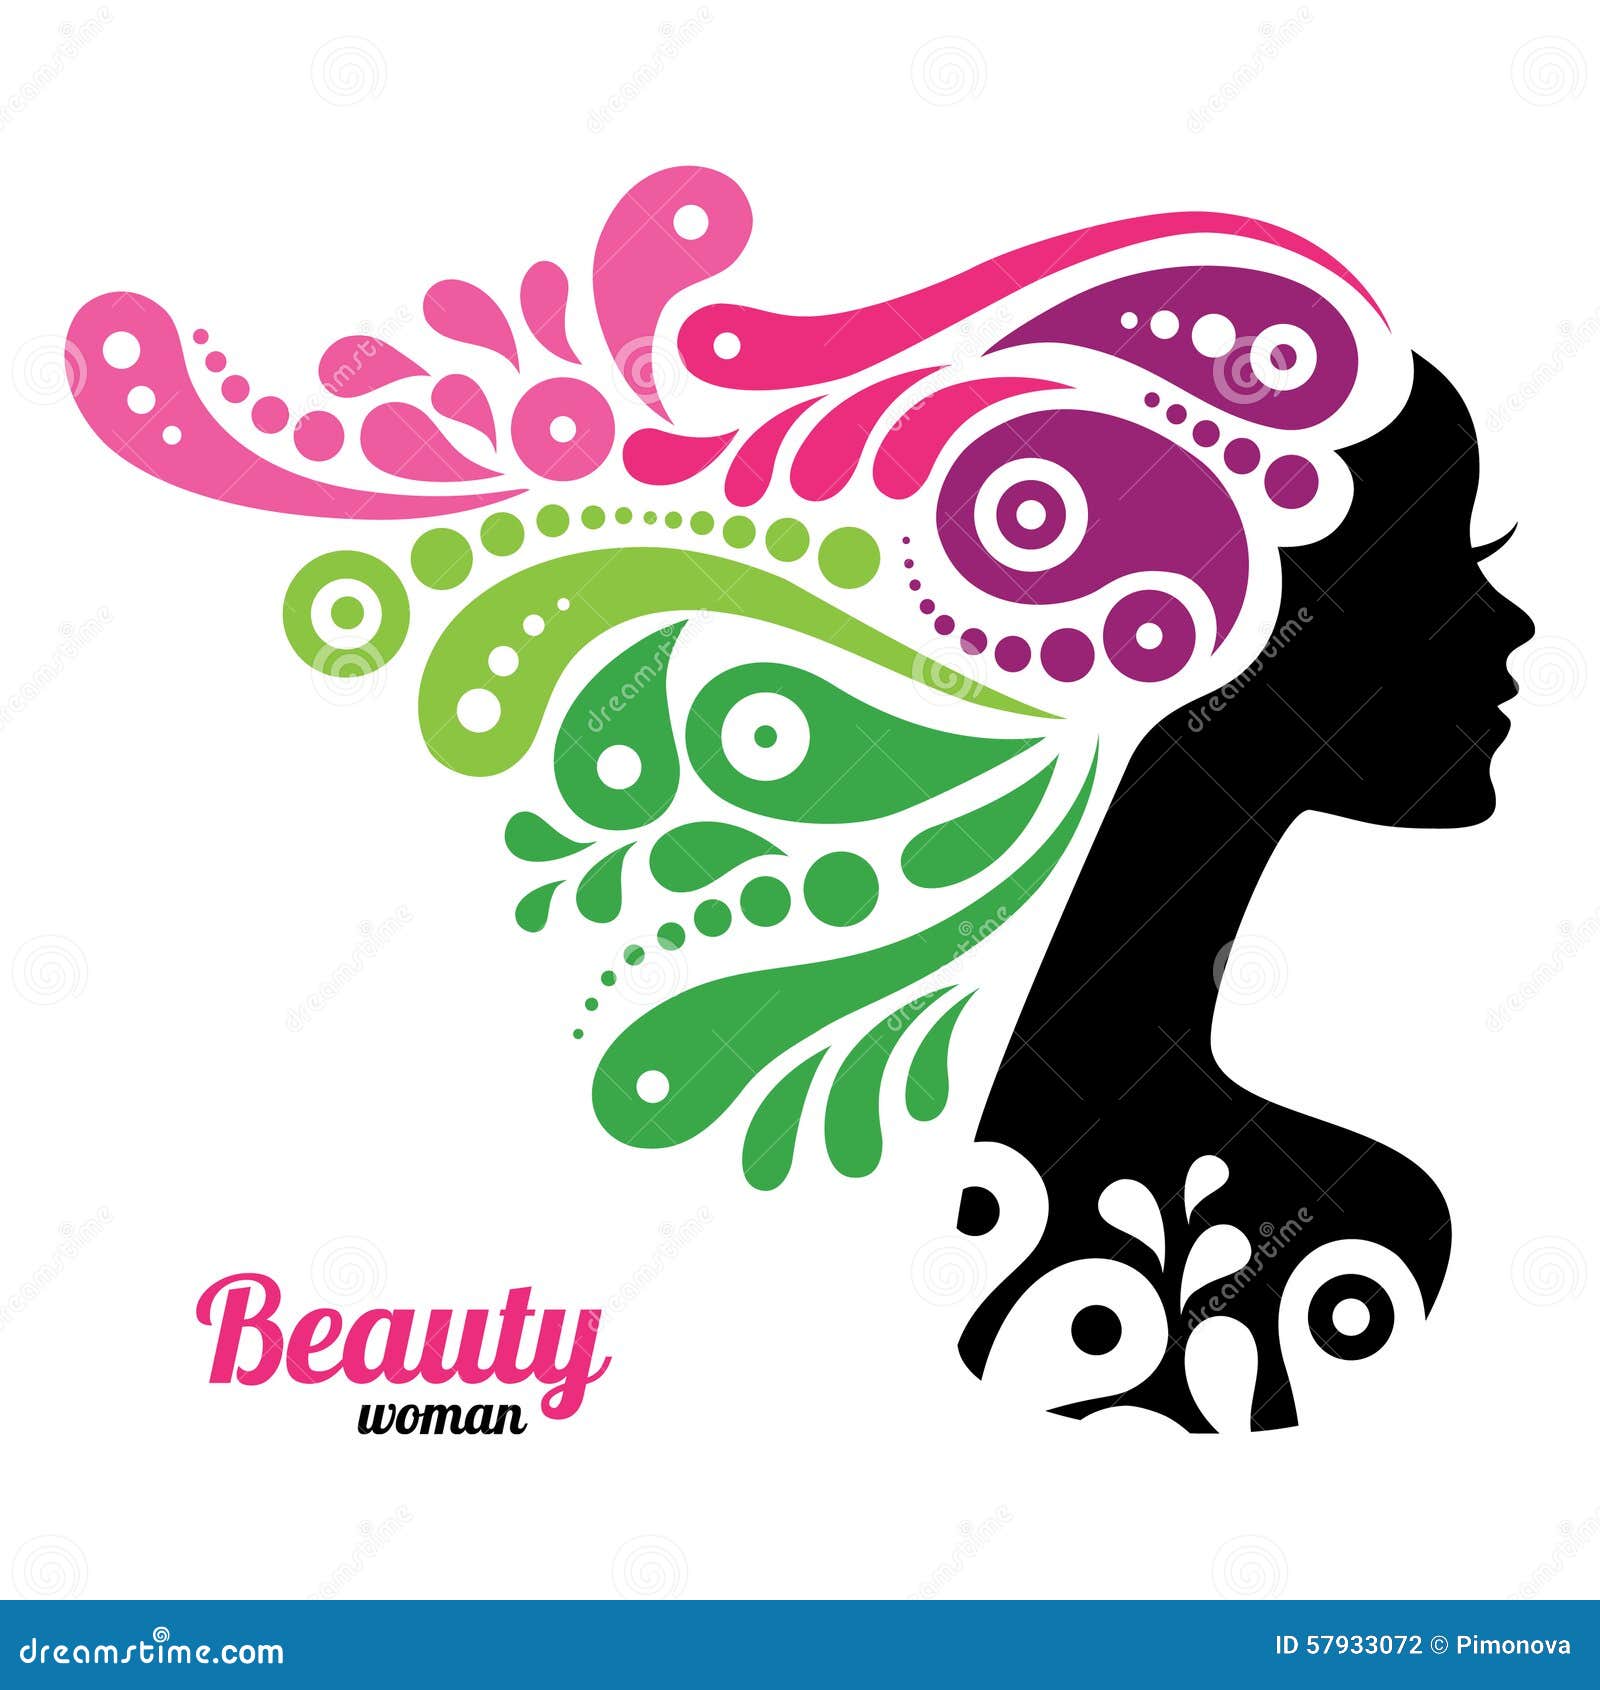 Beautiful woman silhouette stock vector. Illustration of color - 57933072